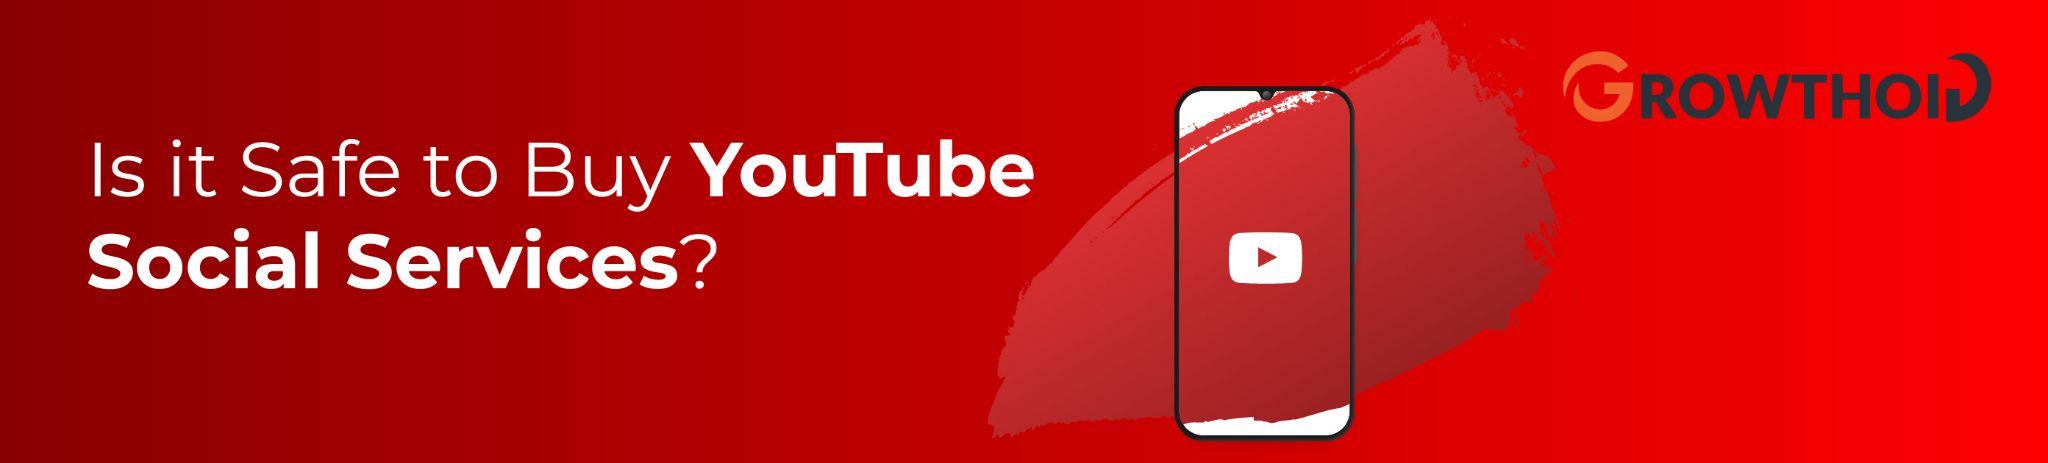 Is it Safe to Buy YouTube Social Services?